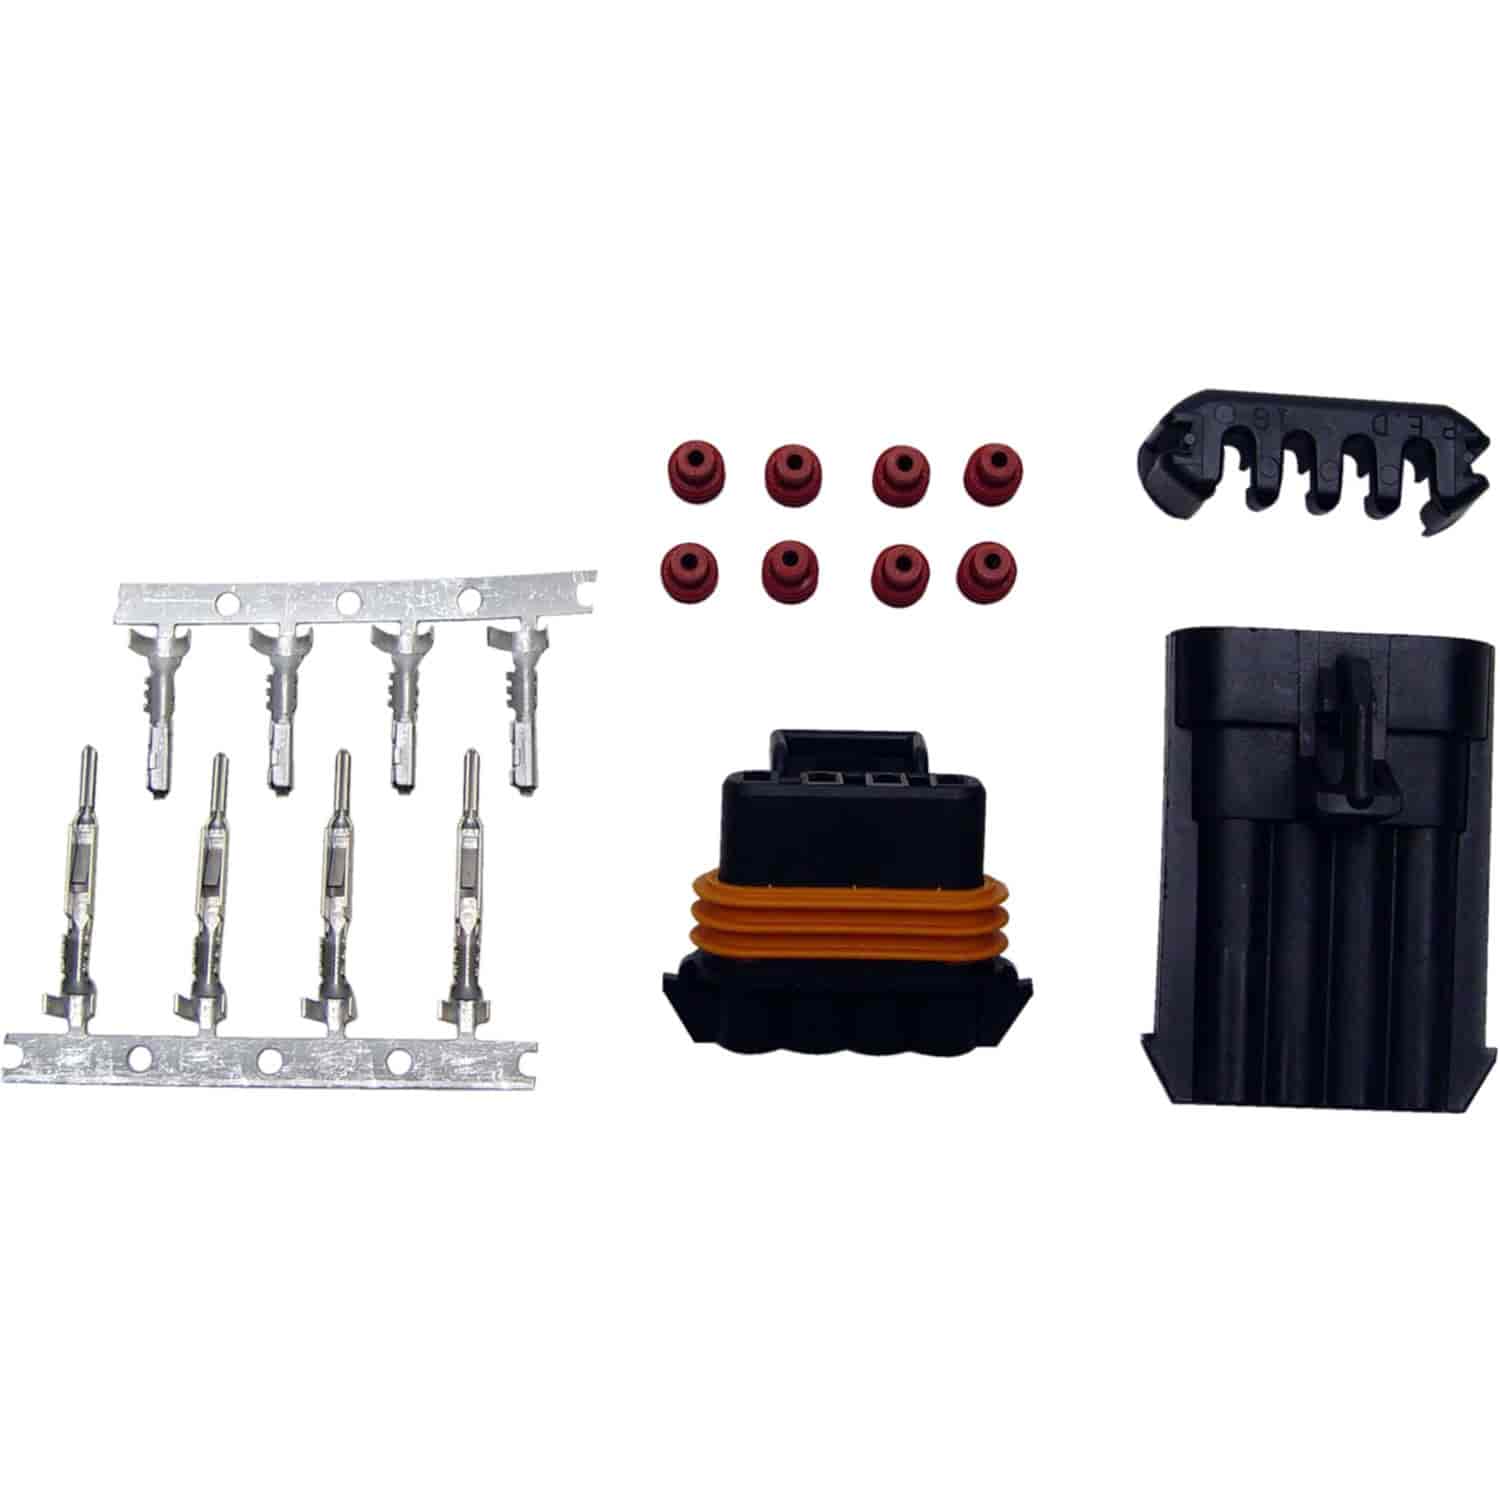 CONNECTOR KIT FAST VSS AND AUX. SHAFT